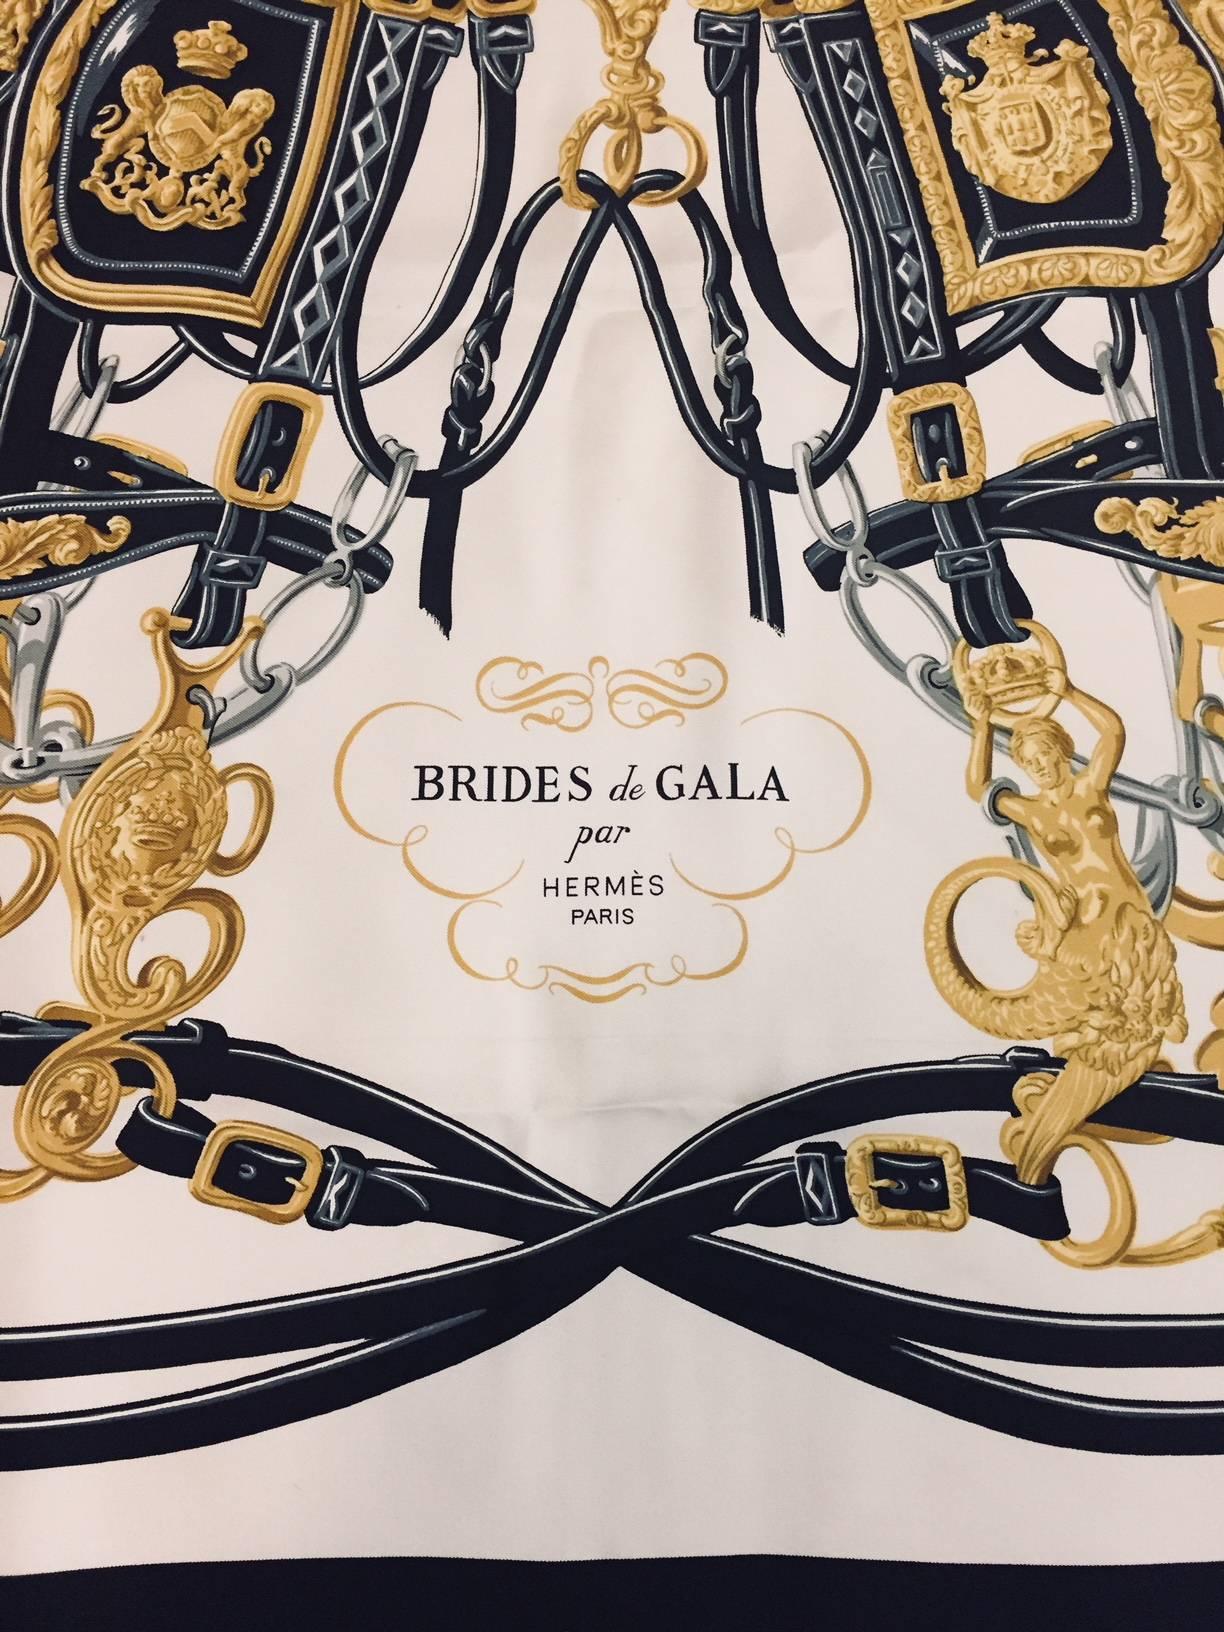 Hermès Brides de Gala Silk Twill Carre by Hugo Grygkar was introduced in 1957 and has become the best selling Hermes scarf of all time.  Truly iconic, this print celebrates equestrian sport at the highest level of achievement in black and white with